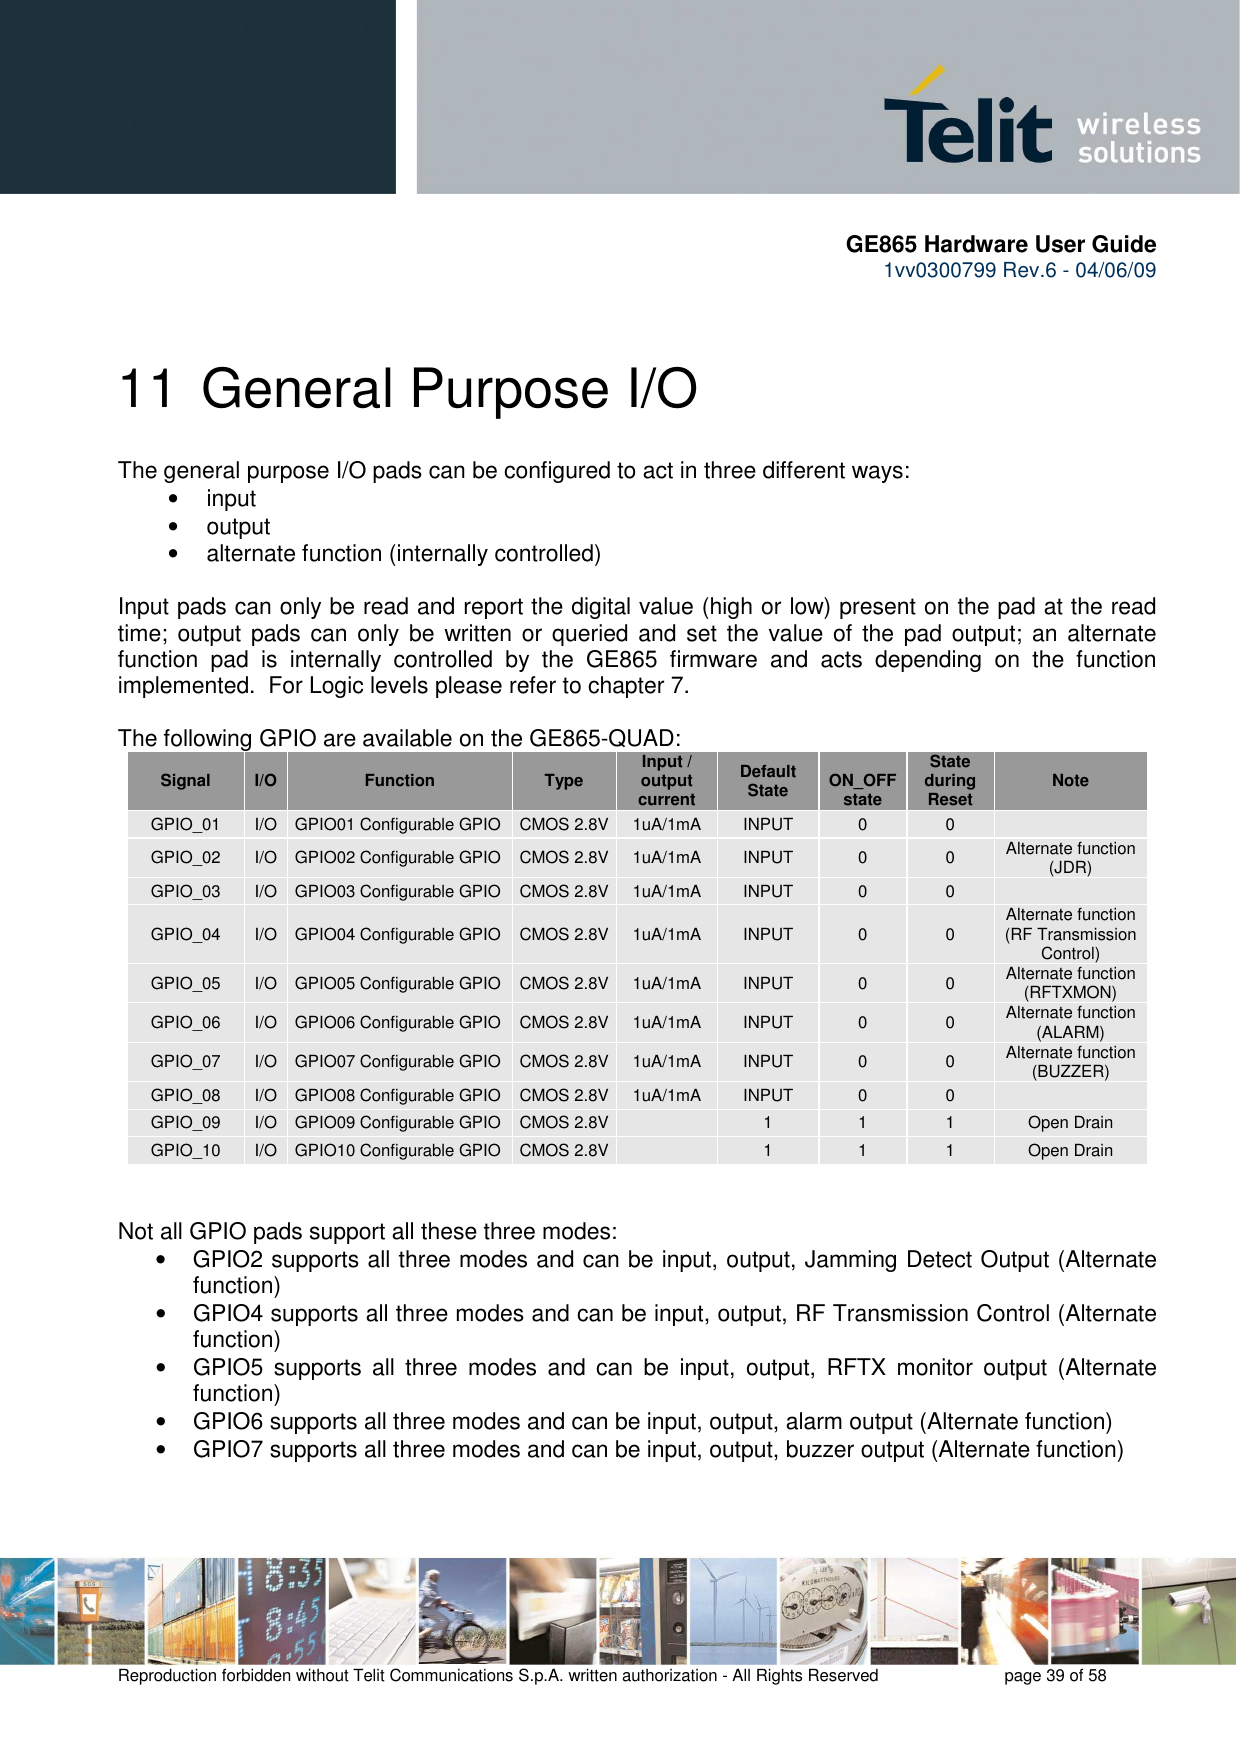       GE865 Hardware User Guide 1vv0300799 Rev.6 - 04/06/09      Reproduction forbidden without Telit Communications S.p.A. written authorization - All Rights Reserved    page 39 of 58  11 General Purpose I/O The general purpose I/O pads can be configured to act in three different ways: •  input •  output •  alternate function (internally controlled)  Input pads can only be read and report the digital value (high or low) present on the pad at the read time; output pads can only be  written or queried and  set  the value of  the pad output; an alternate function  pad  is  internally  controlled  by  the  GE865  firmware  and  acts  depending  on  the  function implemented.  For Logic levels please refer to chapter 7.  The following GPIO are available on the GE865-QUAD: Signal  I/O  Function  Type Input / output current Default State  ON_OFF state State during Reset  Note GPIO_01  I/O  GPIO01 Configurable GPIO  CMOS 2.8V 1uA/1mA  INPUT  0  0   GPIO_02  I/O  GPIO02 Configurable GPIO  CMOS 2.8V 1uA/1mA  INPUT  0  0  Alternate function  (JDR) GPIO_03  I/O  GPIO03 Configurable GPIO  CMOS 2.8V 1uA/1mA  INPUT  0  0   GPIO_04  I/O  GPIO04 Configurable GPIO  CMOS 2.8V 1uA/1mA  INPUT  0  0  Alternate function  (RF Transmission Control) GPIO_05  I/O  GPIO05 Configurable GPIO  CMOS 2.8V 1uA/1mA  INPUT  0  0  Alternate function (RFTXMON) GPIO_06  I/O  GPIO06 Configurable GPIO  CMOS 2.8V 1uA/1mA  INPUT  0  0  Alternate function (ALARM) GPIO_07  I/O  GPIO07 Configurable GPIO  CMOS 2.8V 1uA/1mA  INPUT  0  0  Alternate function (BUZZER) GPIO_08  I/O  GPIO08 Configurable GPIO  CMOS 2.8V 1uA/1mA  INPUT  0  0   GPIO_09  I/O  GPIO09 Configurable GPIO  CMOS 2.8V   1  1  1  Open Drain GPIO_10  I/O  GPIO10 Configurable GPIO  CMOS 2.8V   1  1  1  Open Drain   Not all GPIO pads support all these three modes: •  GPIO2 supports all three modes and can be input, output, Jamming Detect Output (Alternate function) •  GPIO4 supports all three modes and can be input, output, RF Transmission Control (Alternate function) •  GPIO5  supports  all  three  modes  and  can  be  input,  output,  RFTX  monitor  output  (Alternate function) •  GPIO6 supports all three modes and can be input, output, alarm output (Alternate function) •  GPIO7 supports all three modes and can be input, output, buzzer output (Alternate function)  